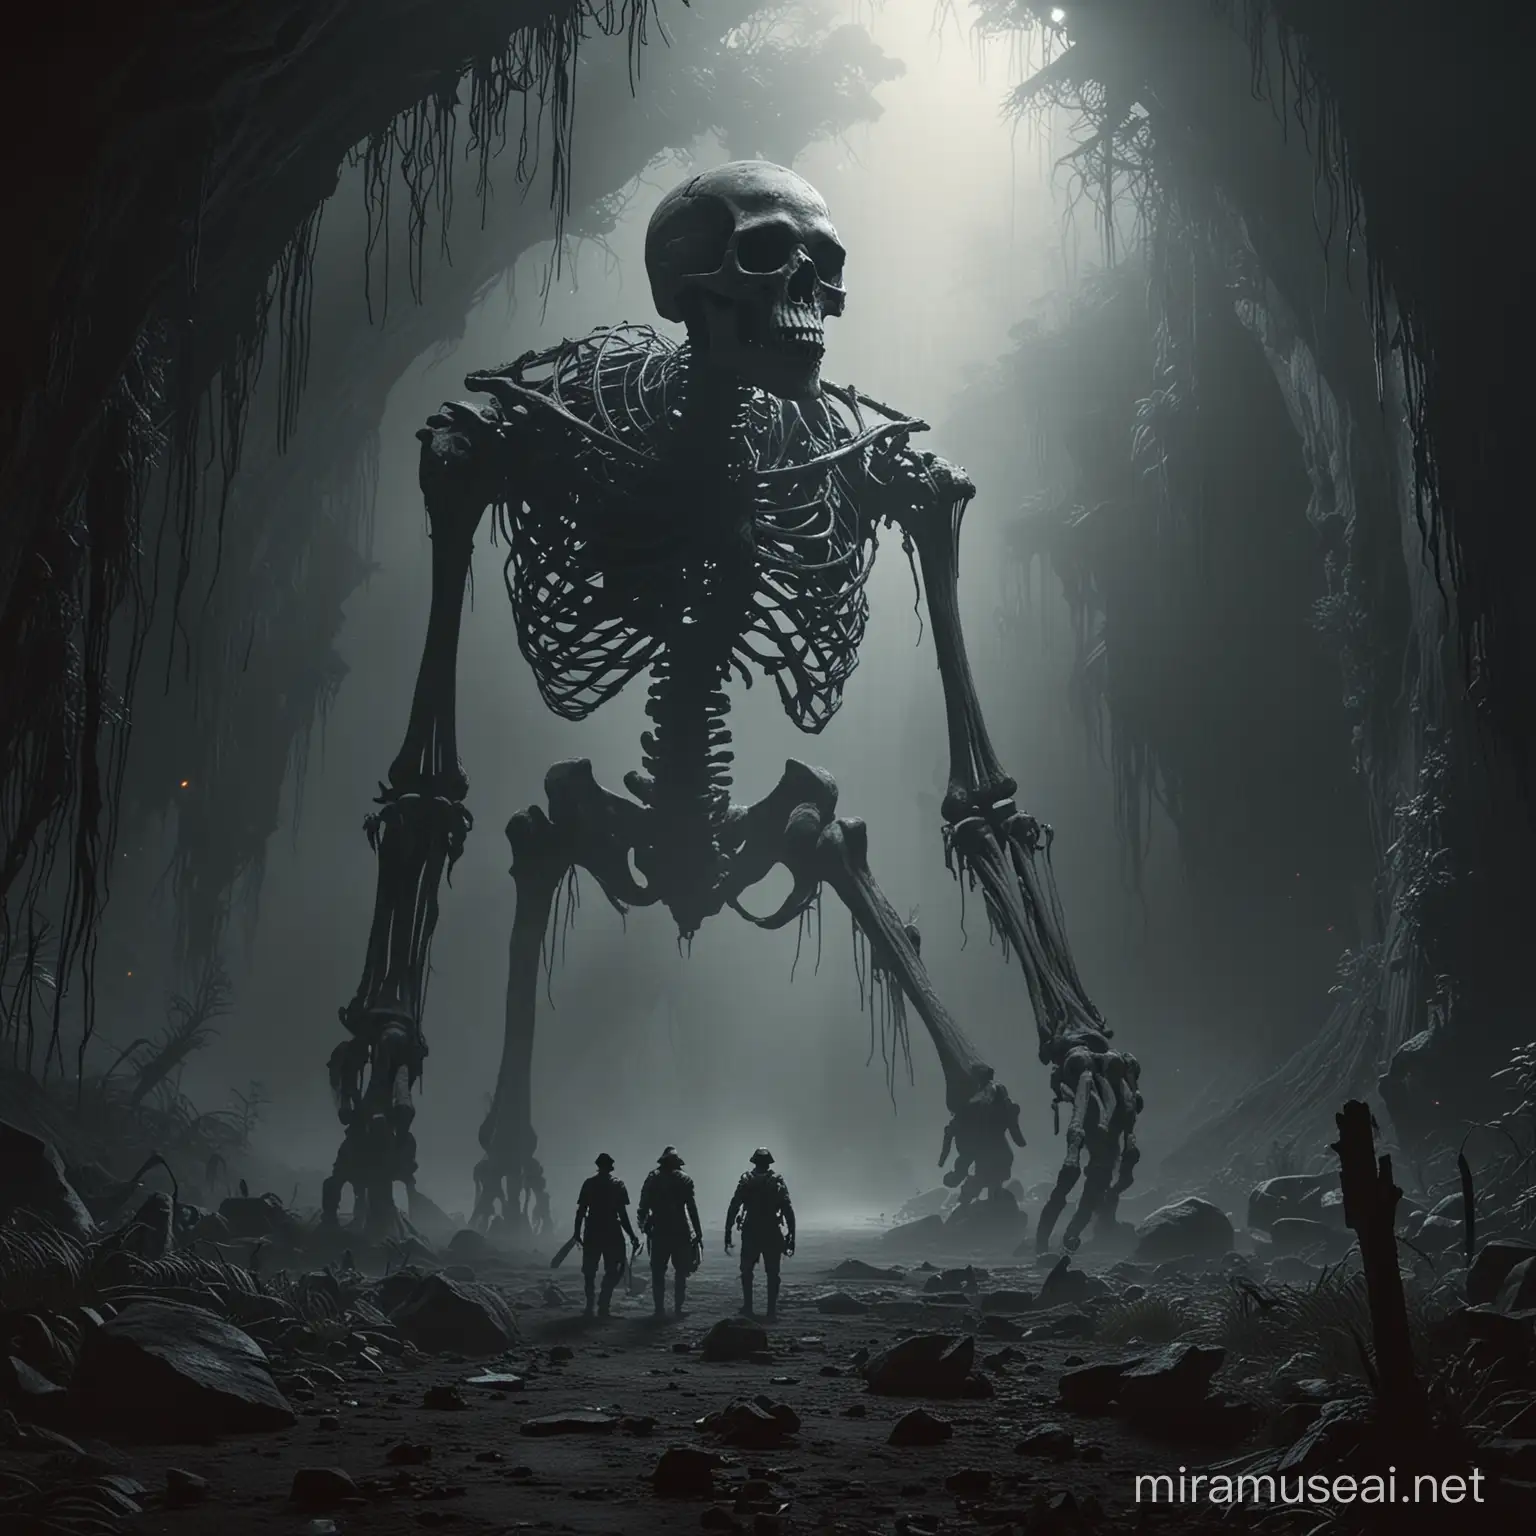 Explorers Discovering Enormous Giant Skeleton in Mysterious Cinematic Scene